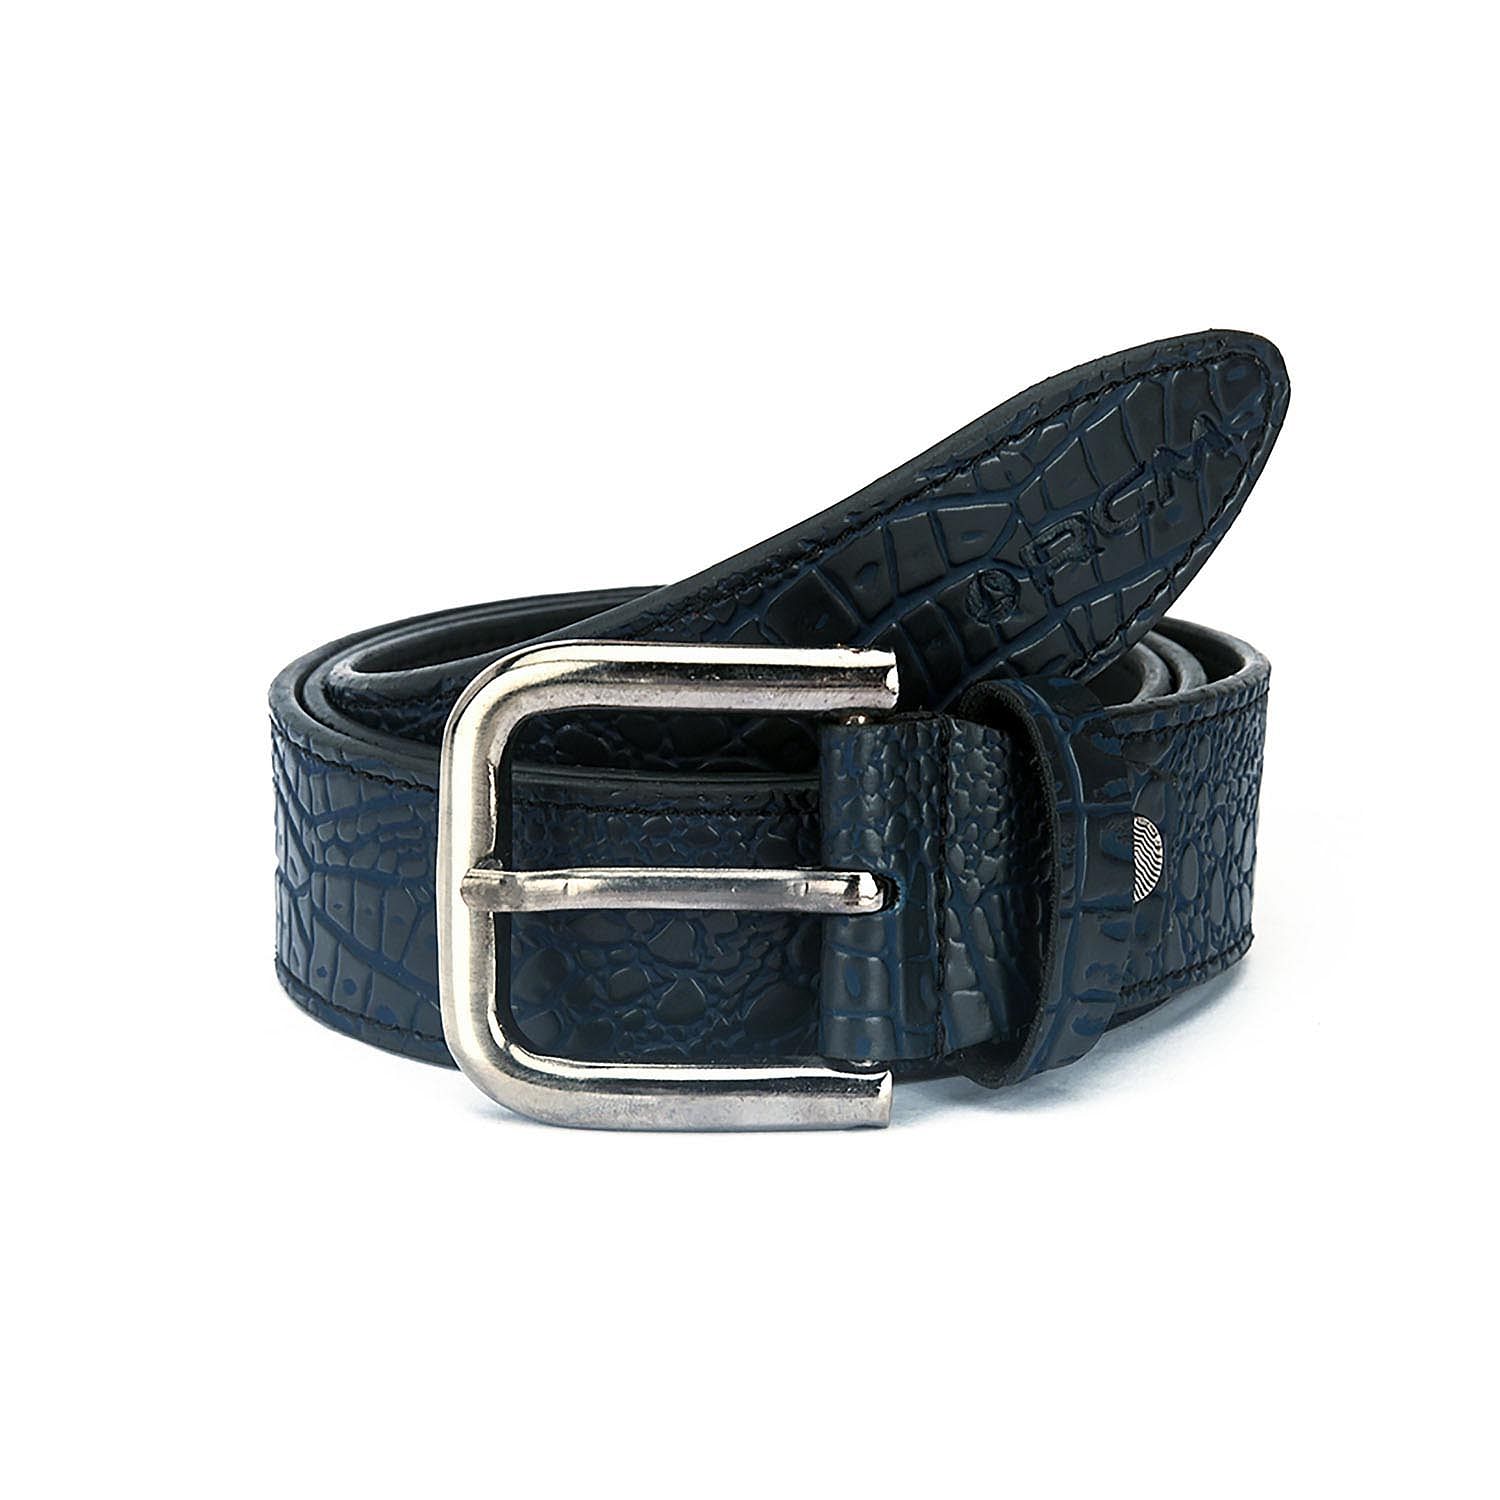 Men's Casual Textured Perforated Belt BLU - LZ-CB-101